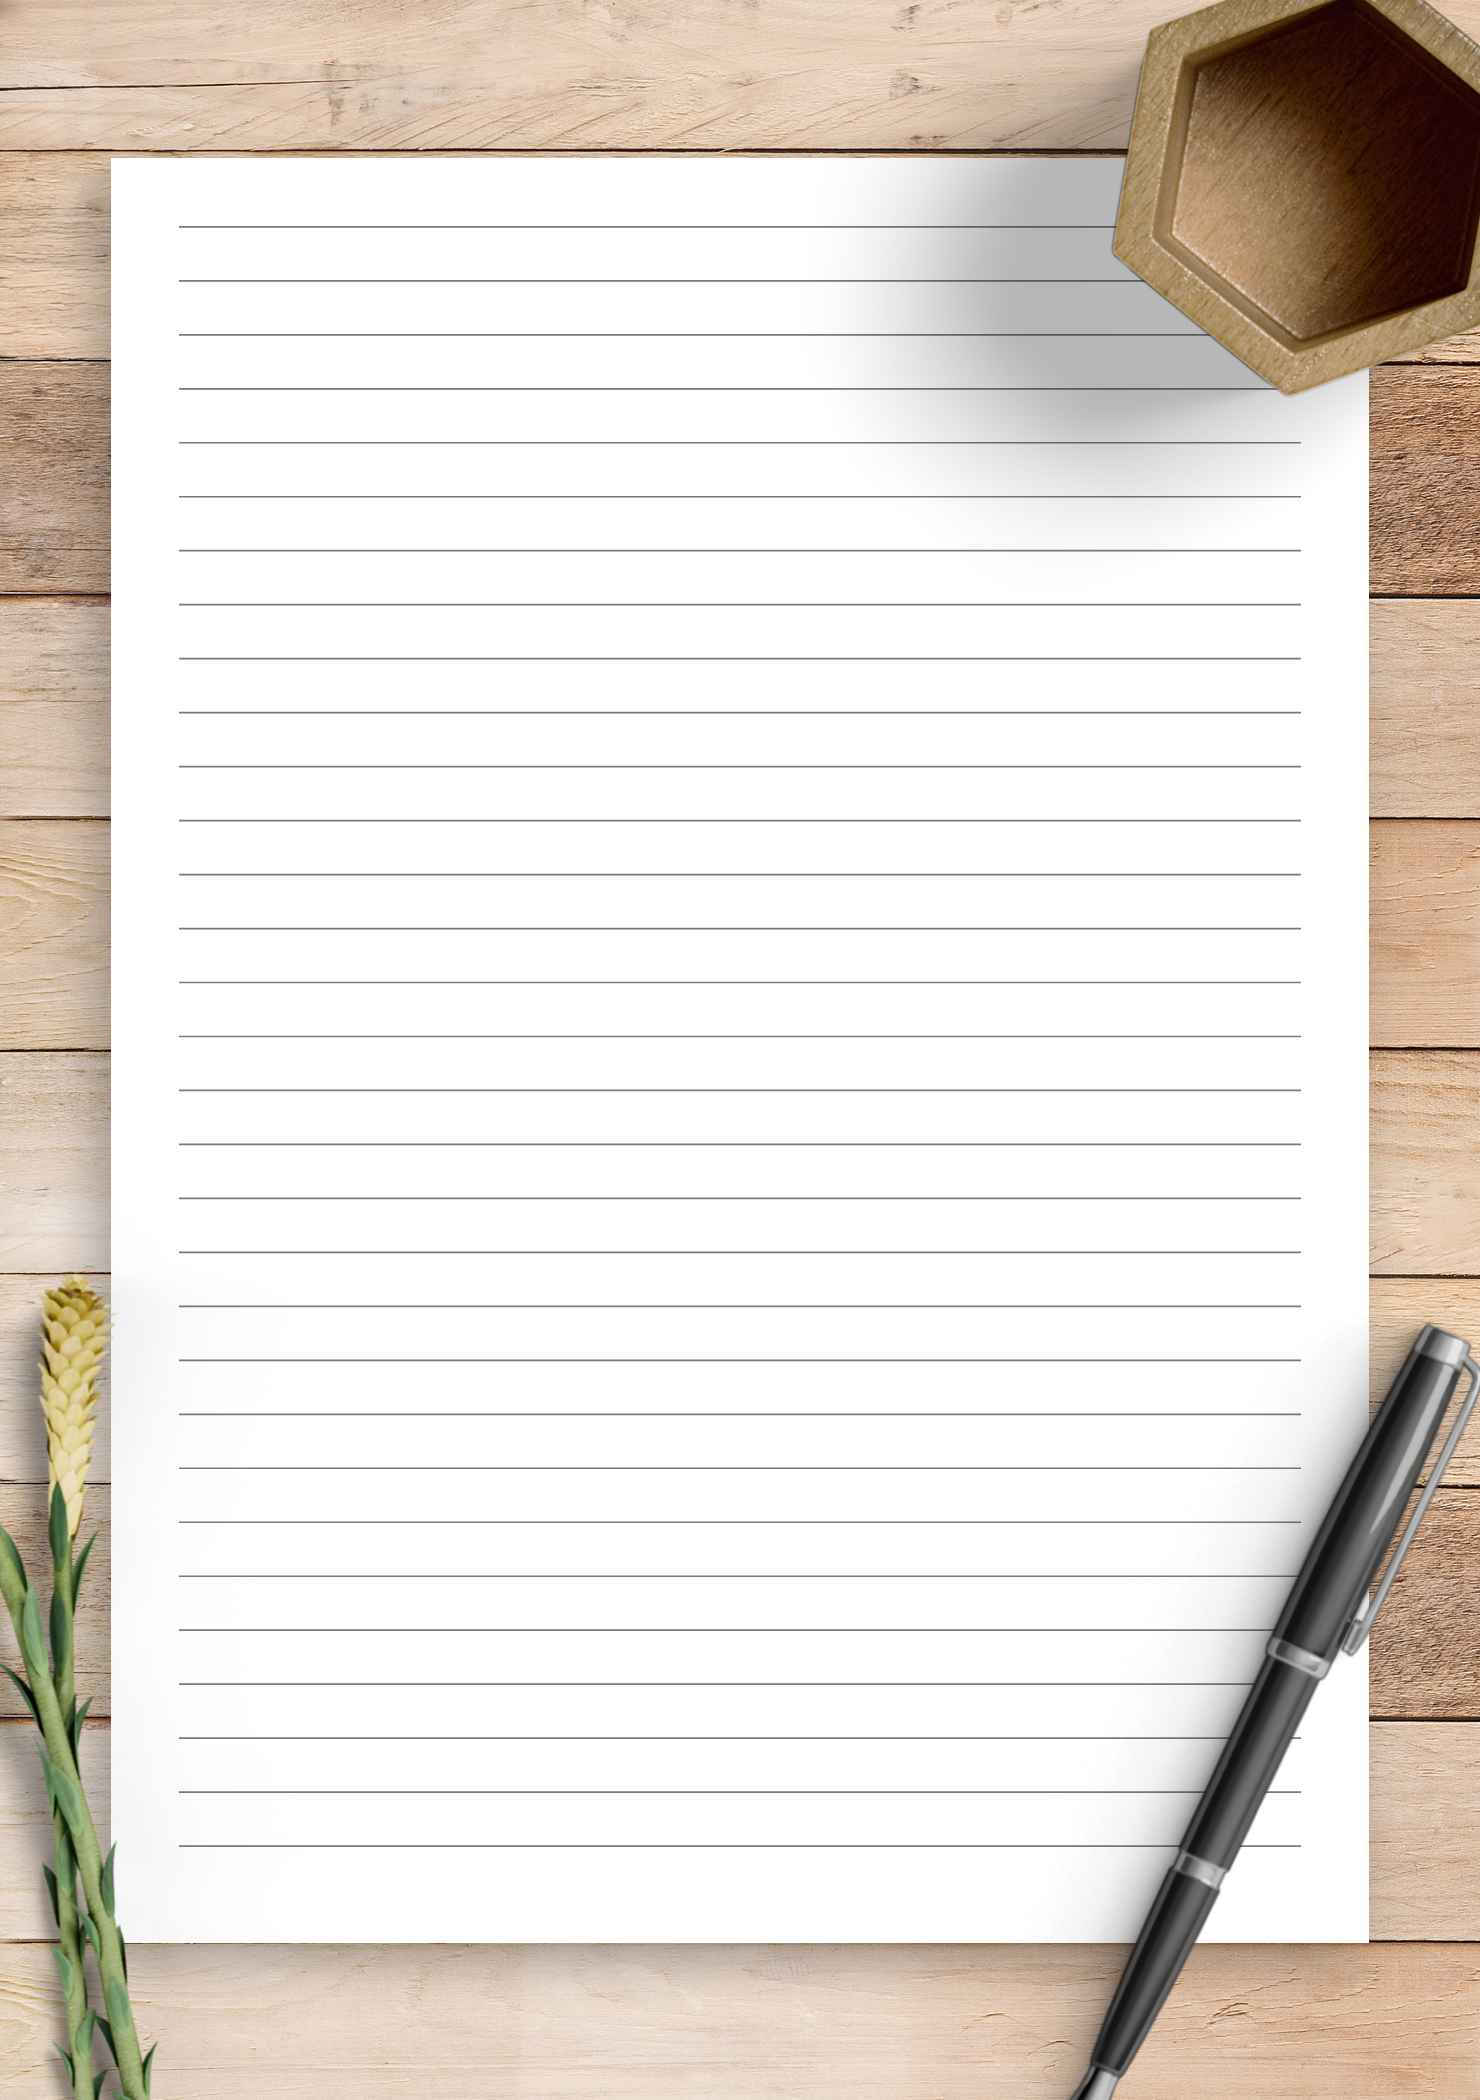 Free Printable Lined Paper Pdf Get What You Need For Free